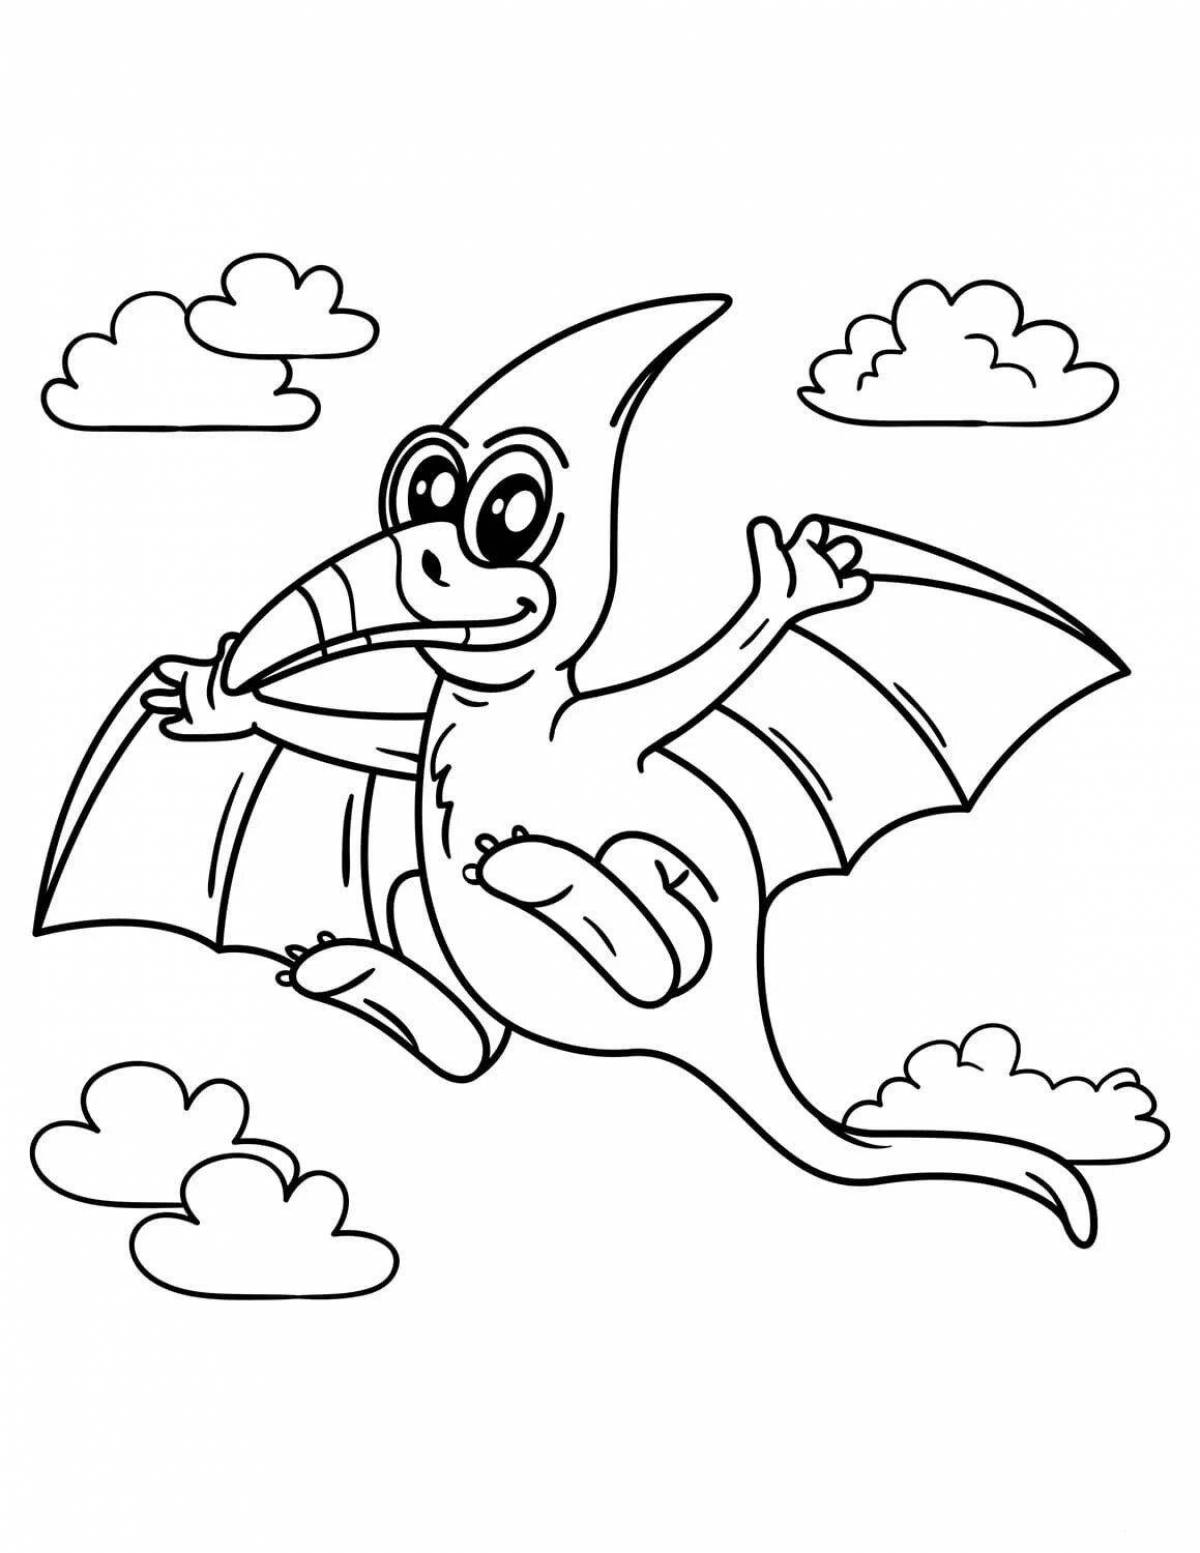 Adorable flying dinosaur coloring book